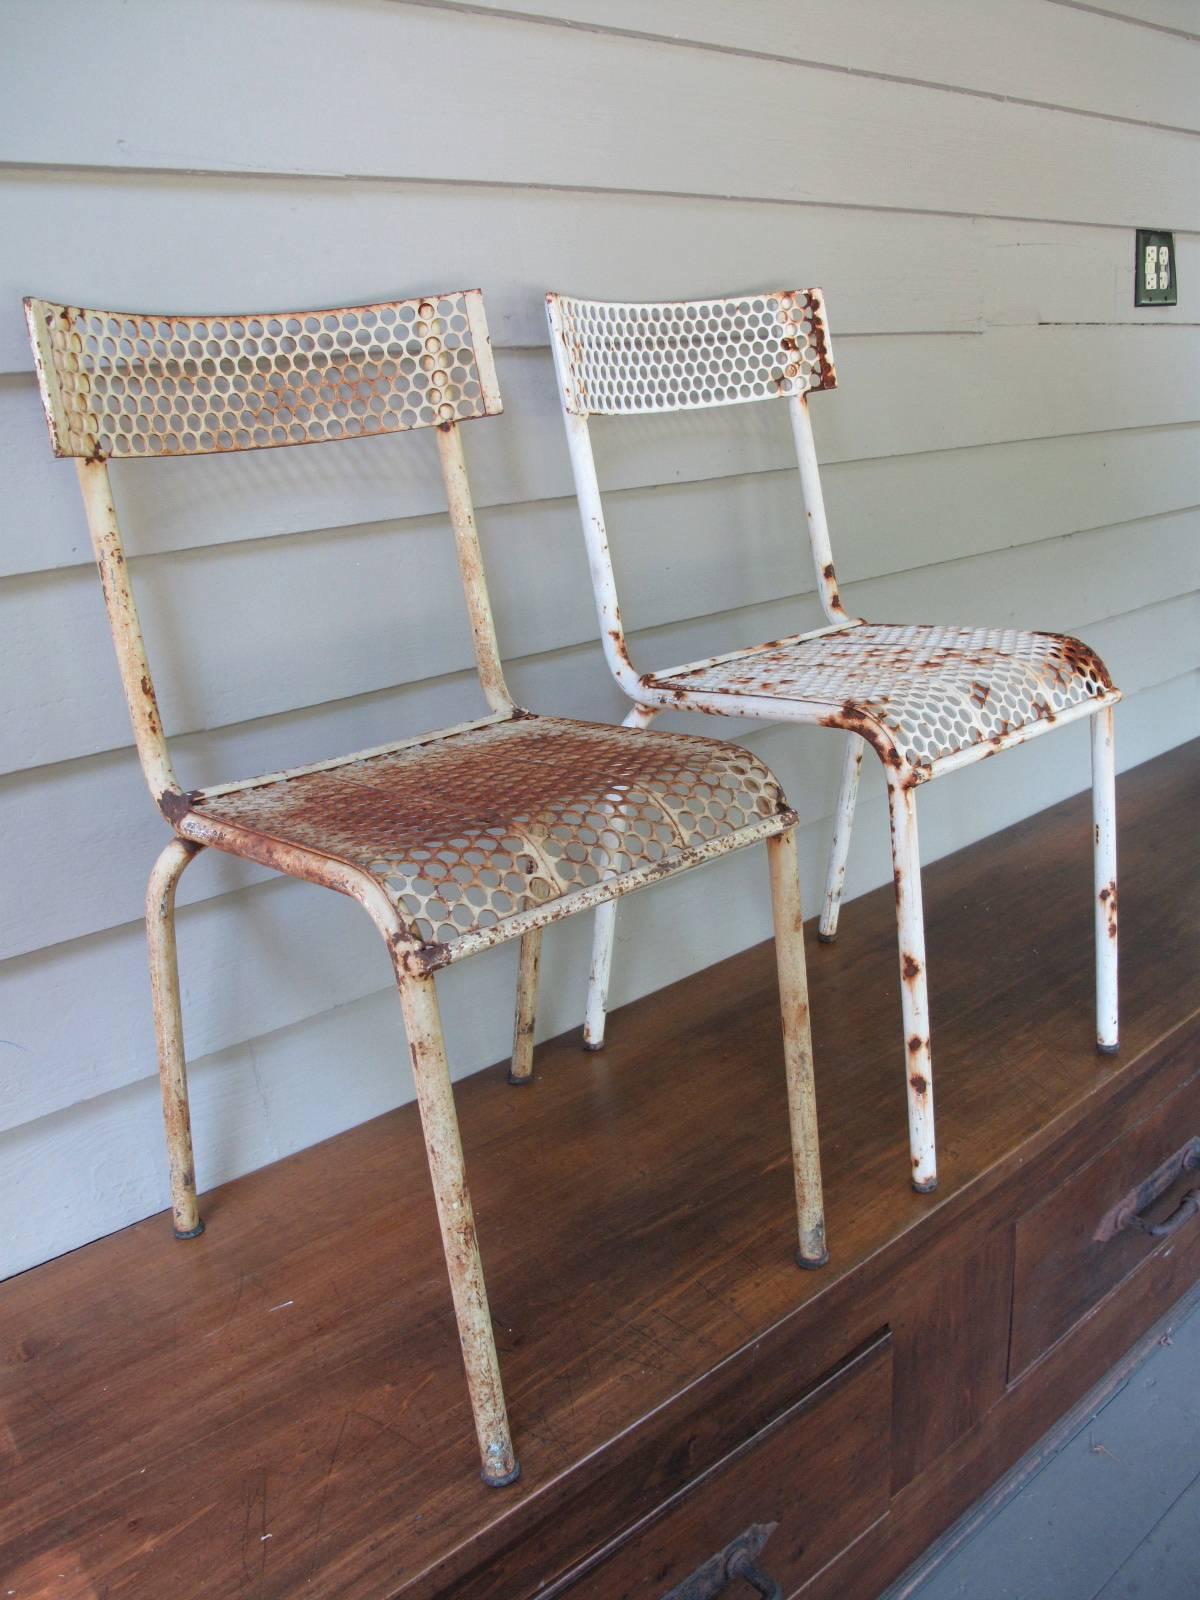 Similar French bistro chairs. Beehive perforated design on backrest and seat. Tubular steel frames. Color varies slightly, one being closer to white and the other ivory.